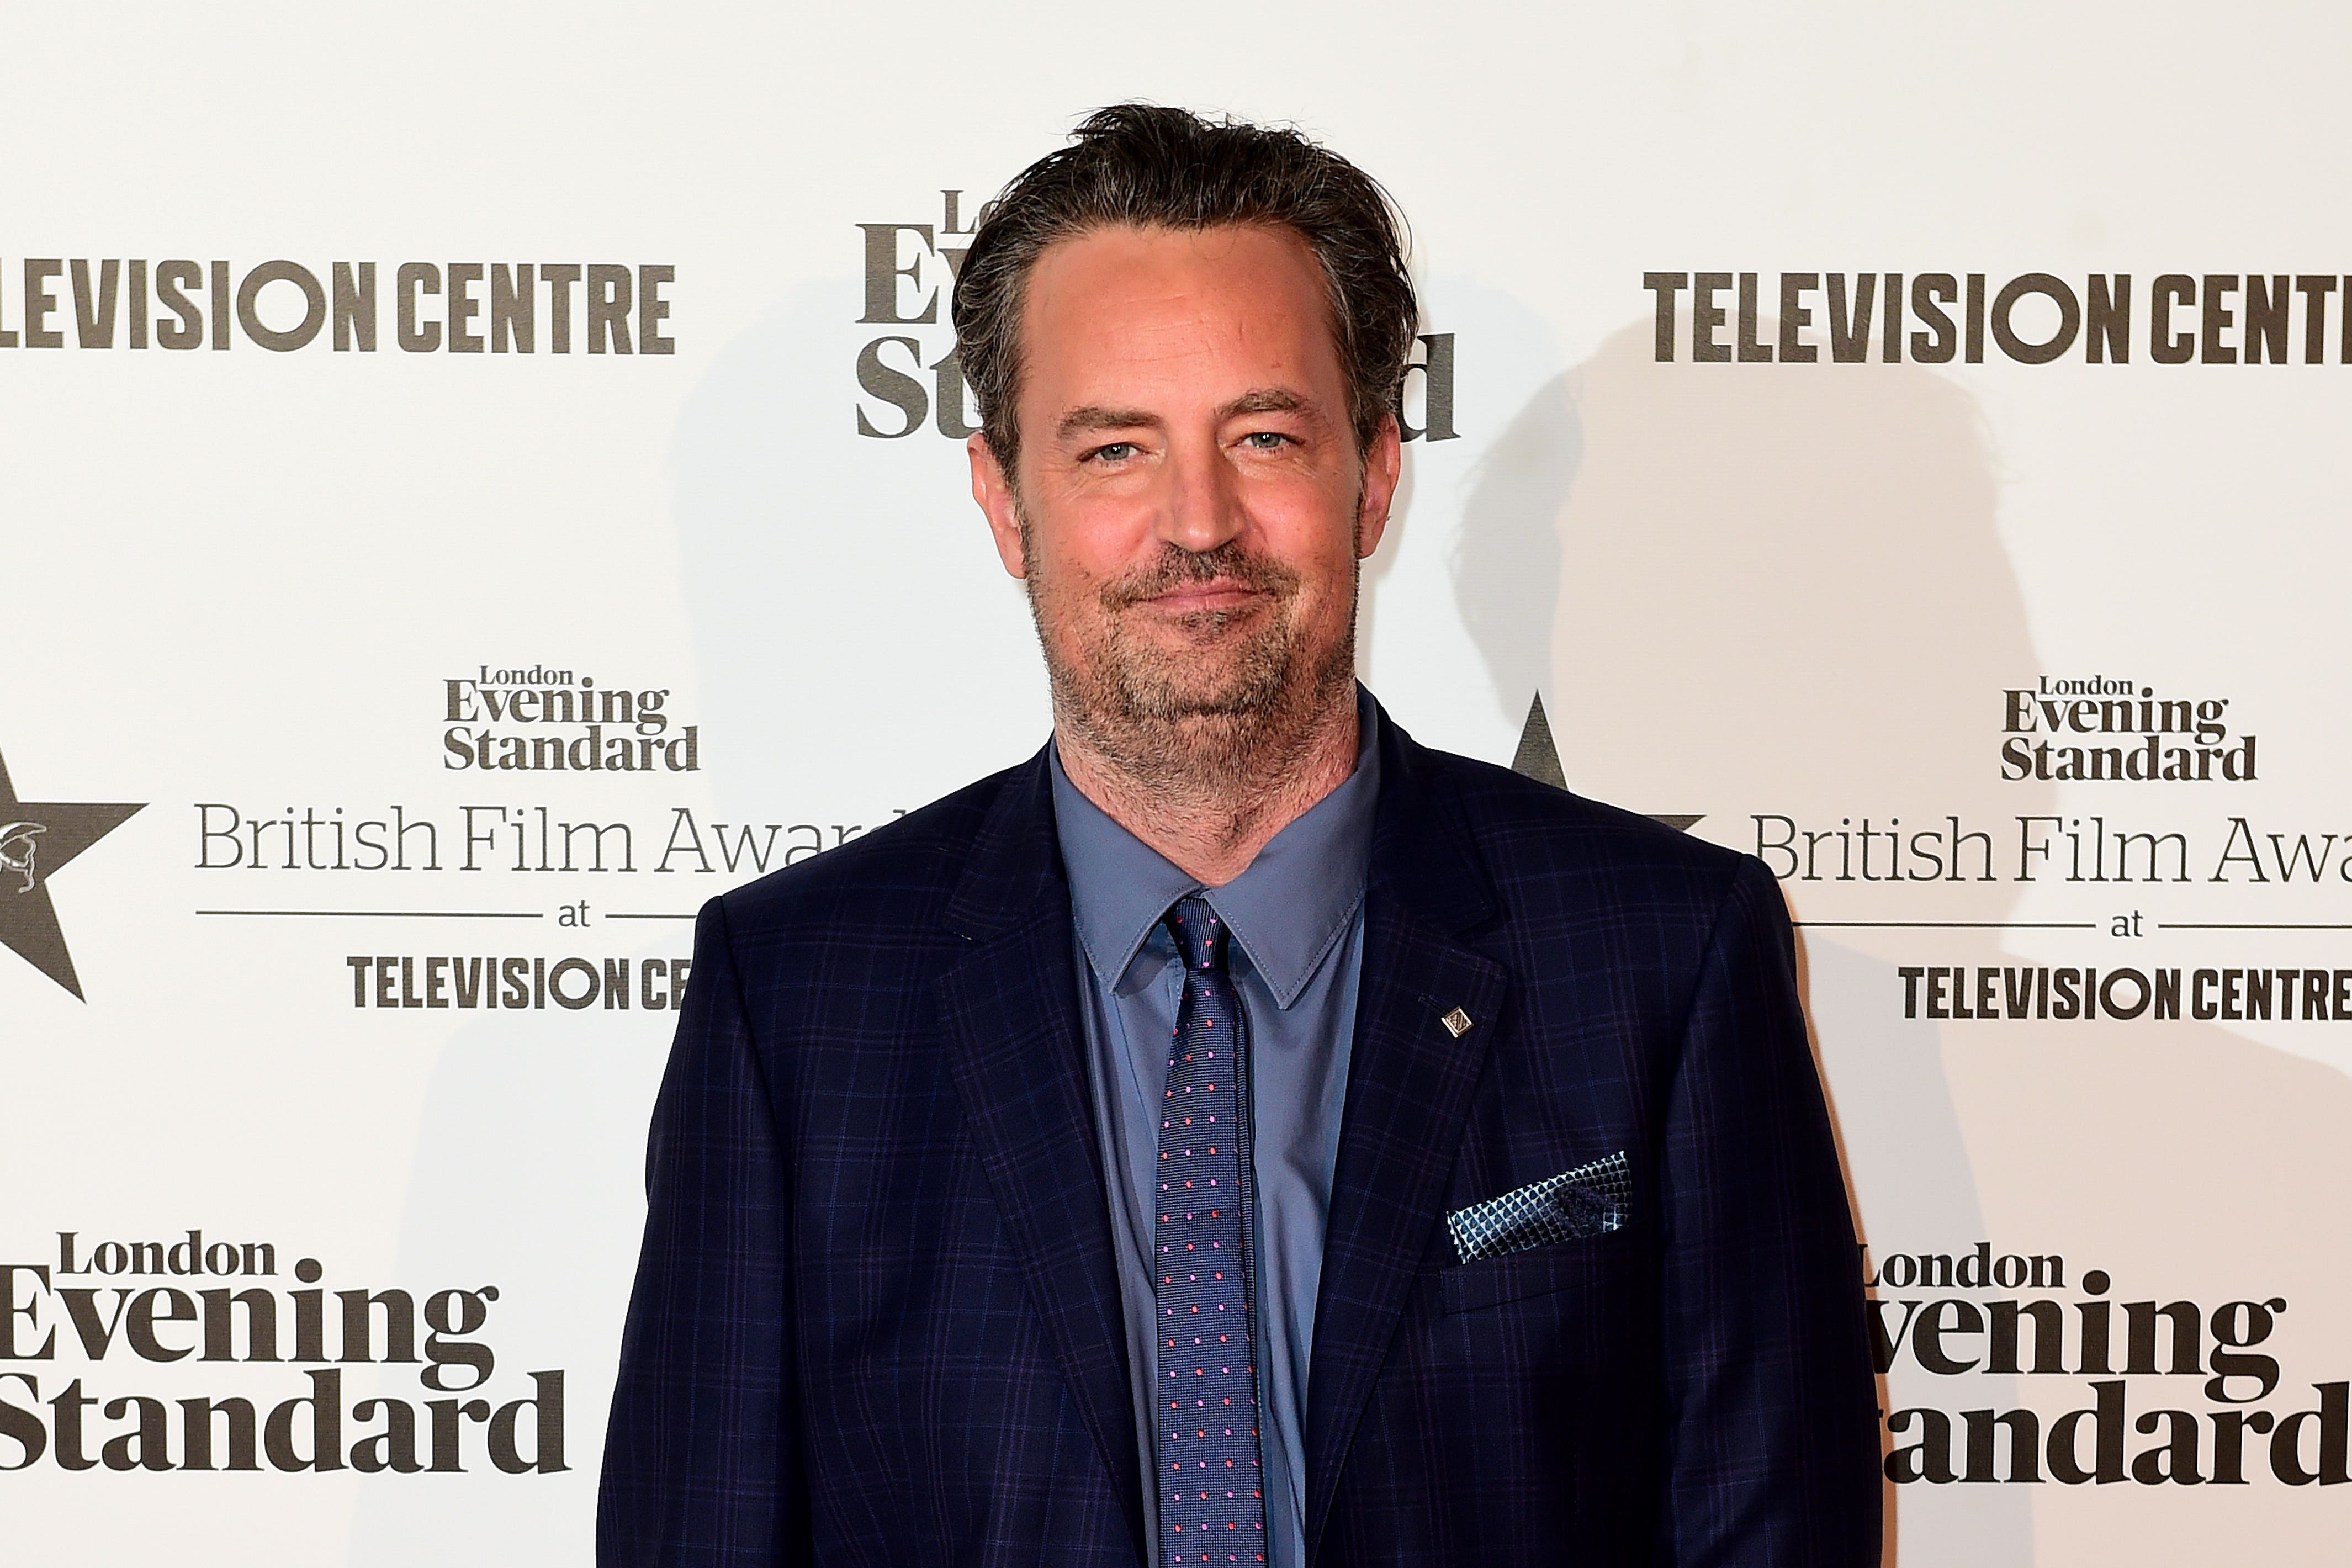 Matthew Perry was a prominent voice for recovering drug addicts